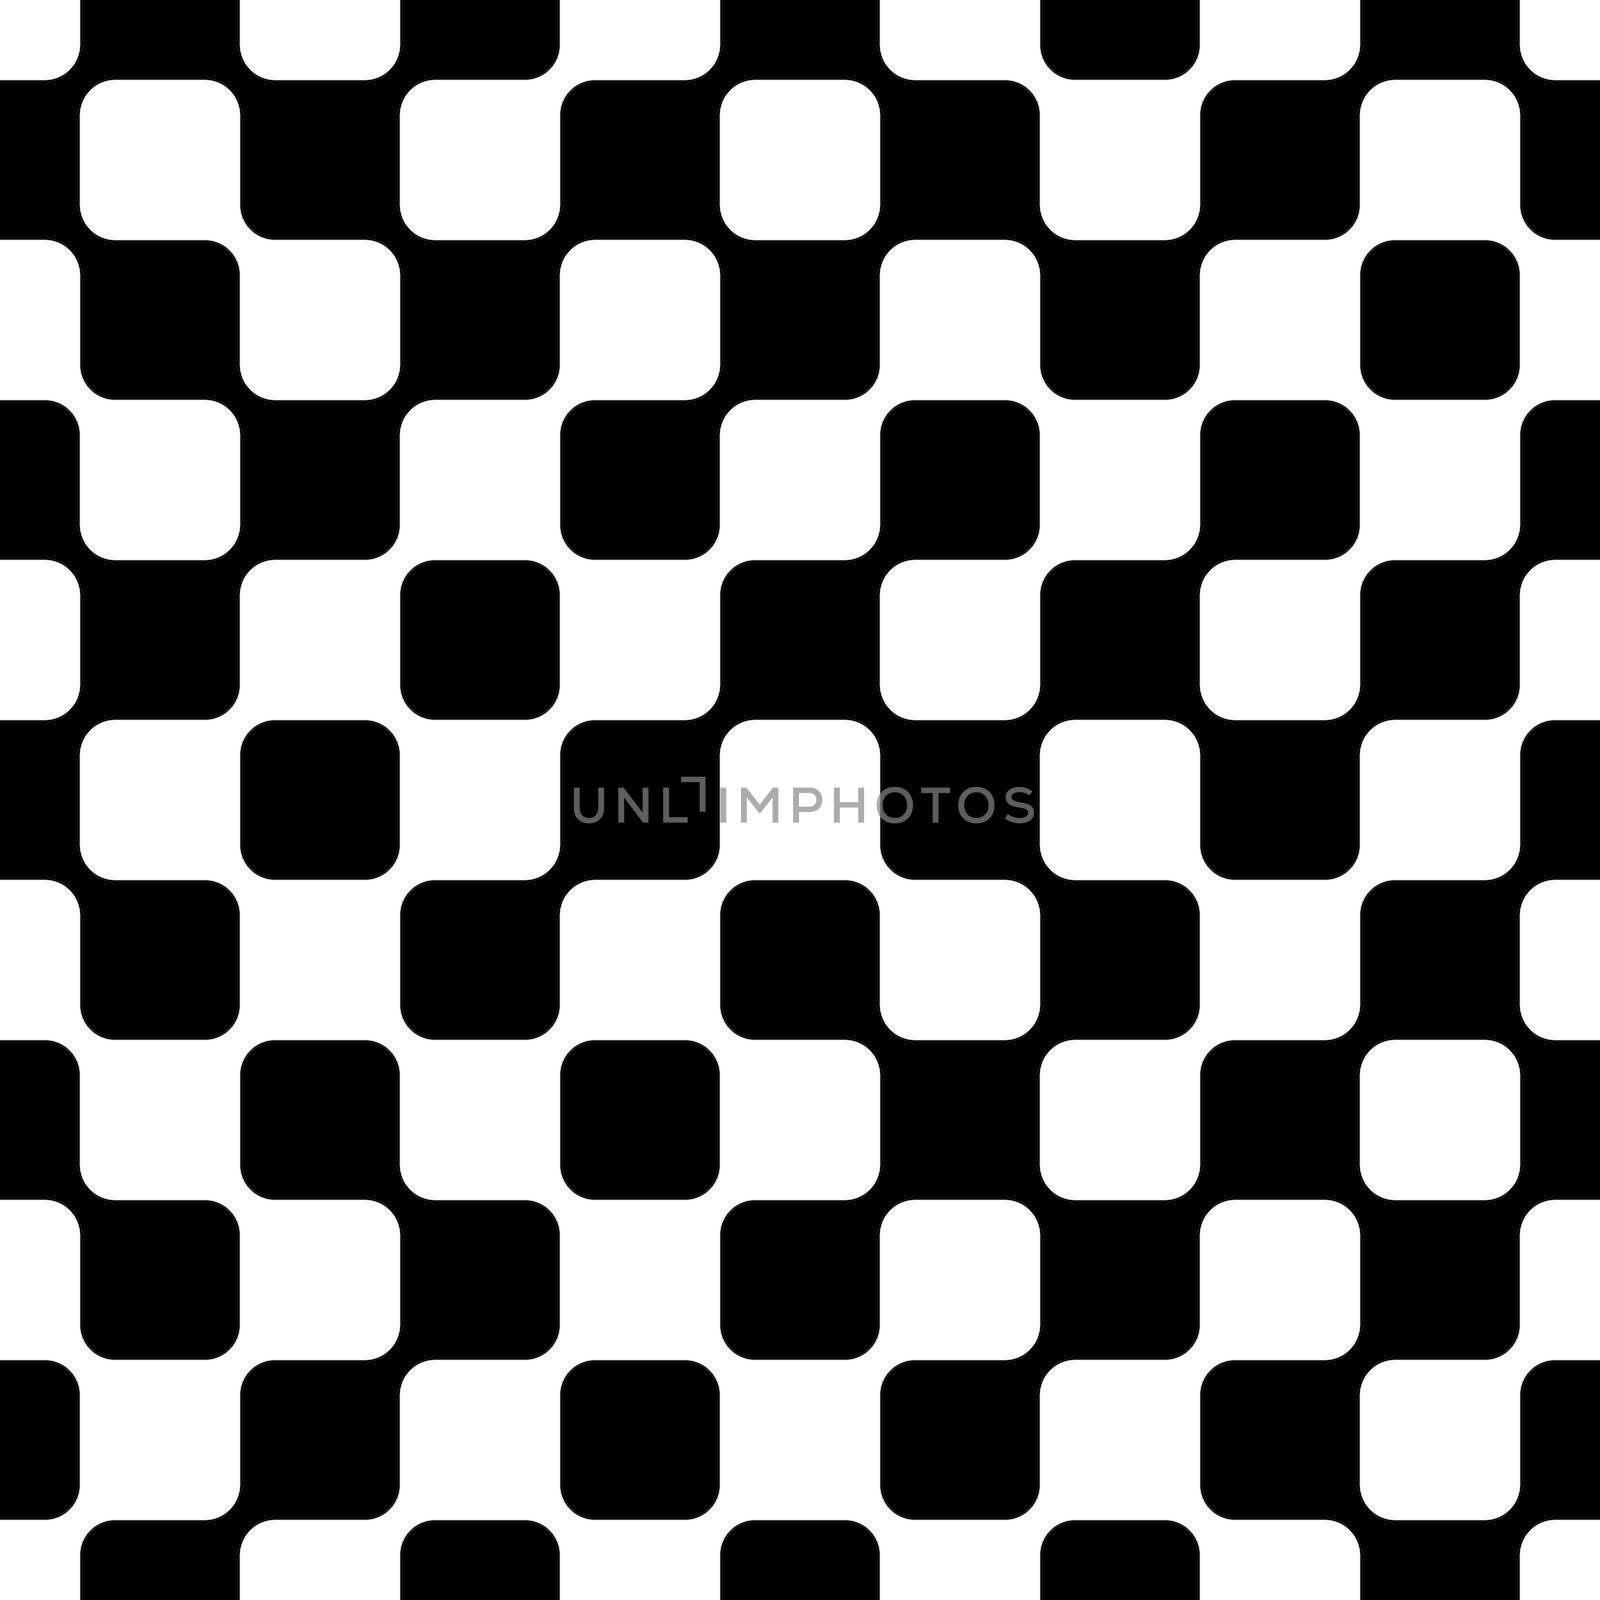 An abstract seamless pattern of black and white geometric shapes that are connected to one another.